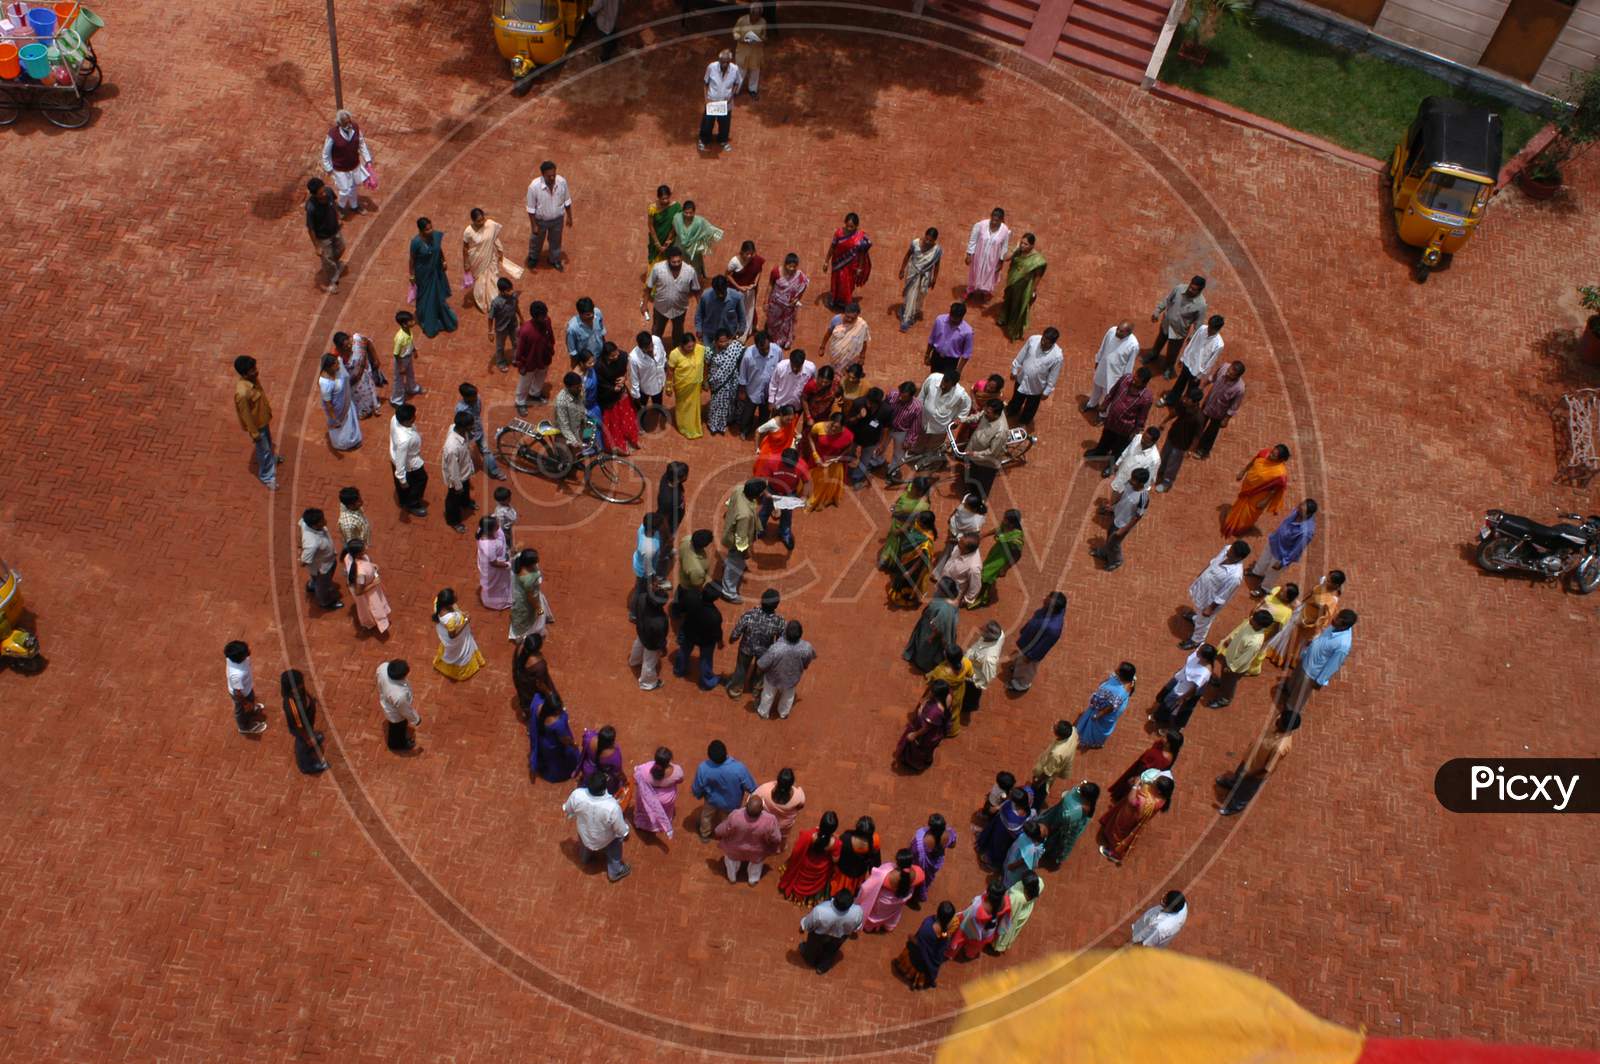 Aerial View Of People As a Group in an Residential Colony